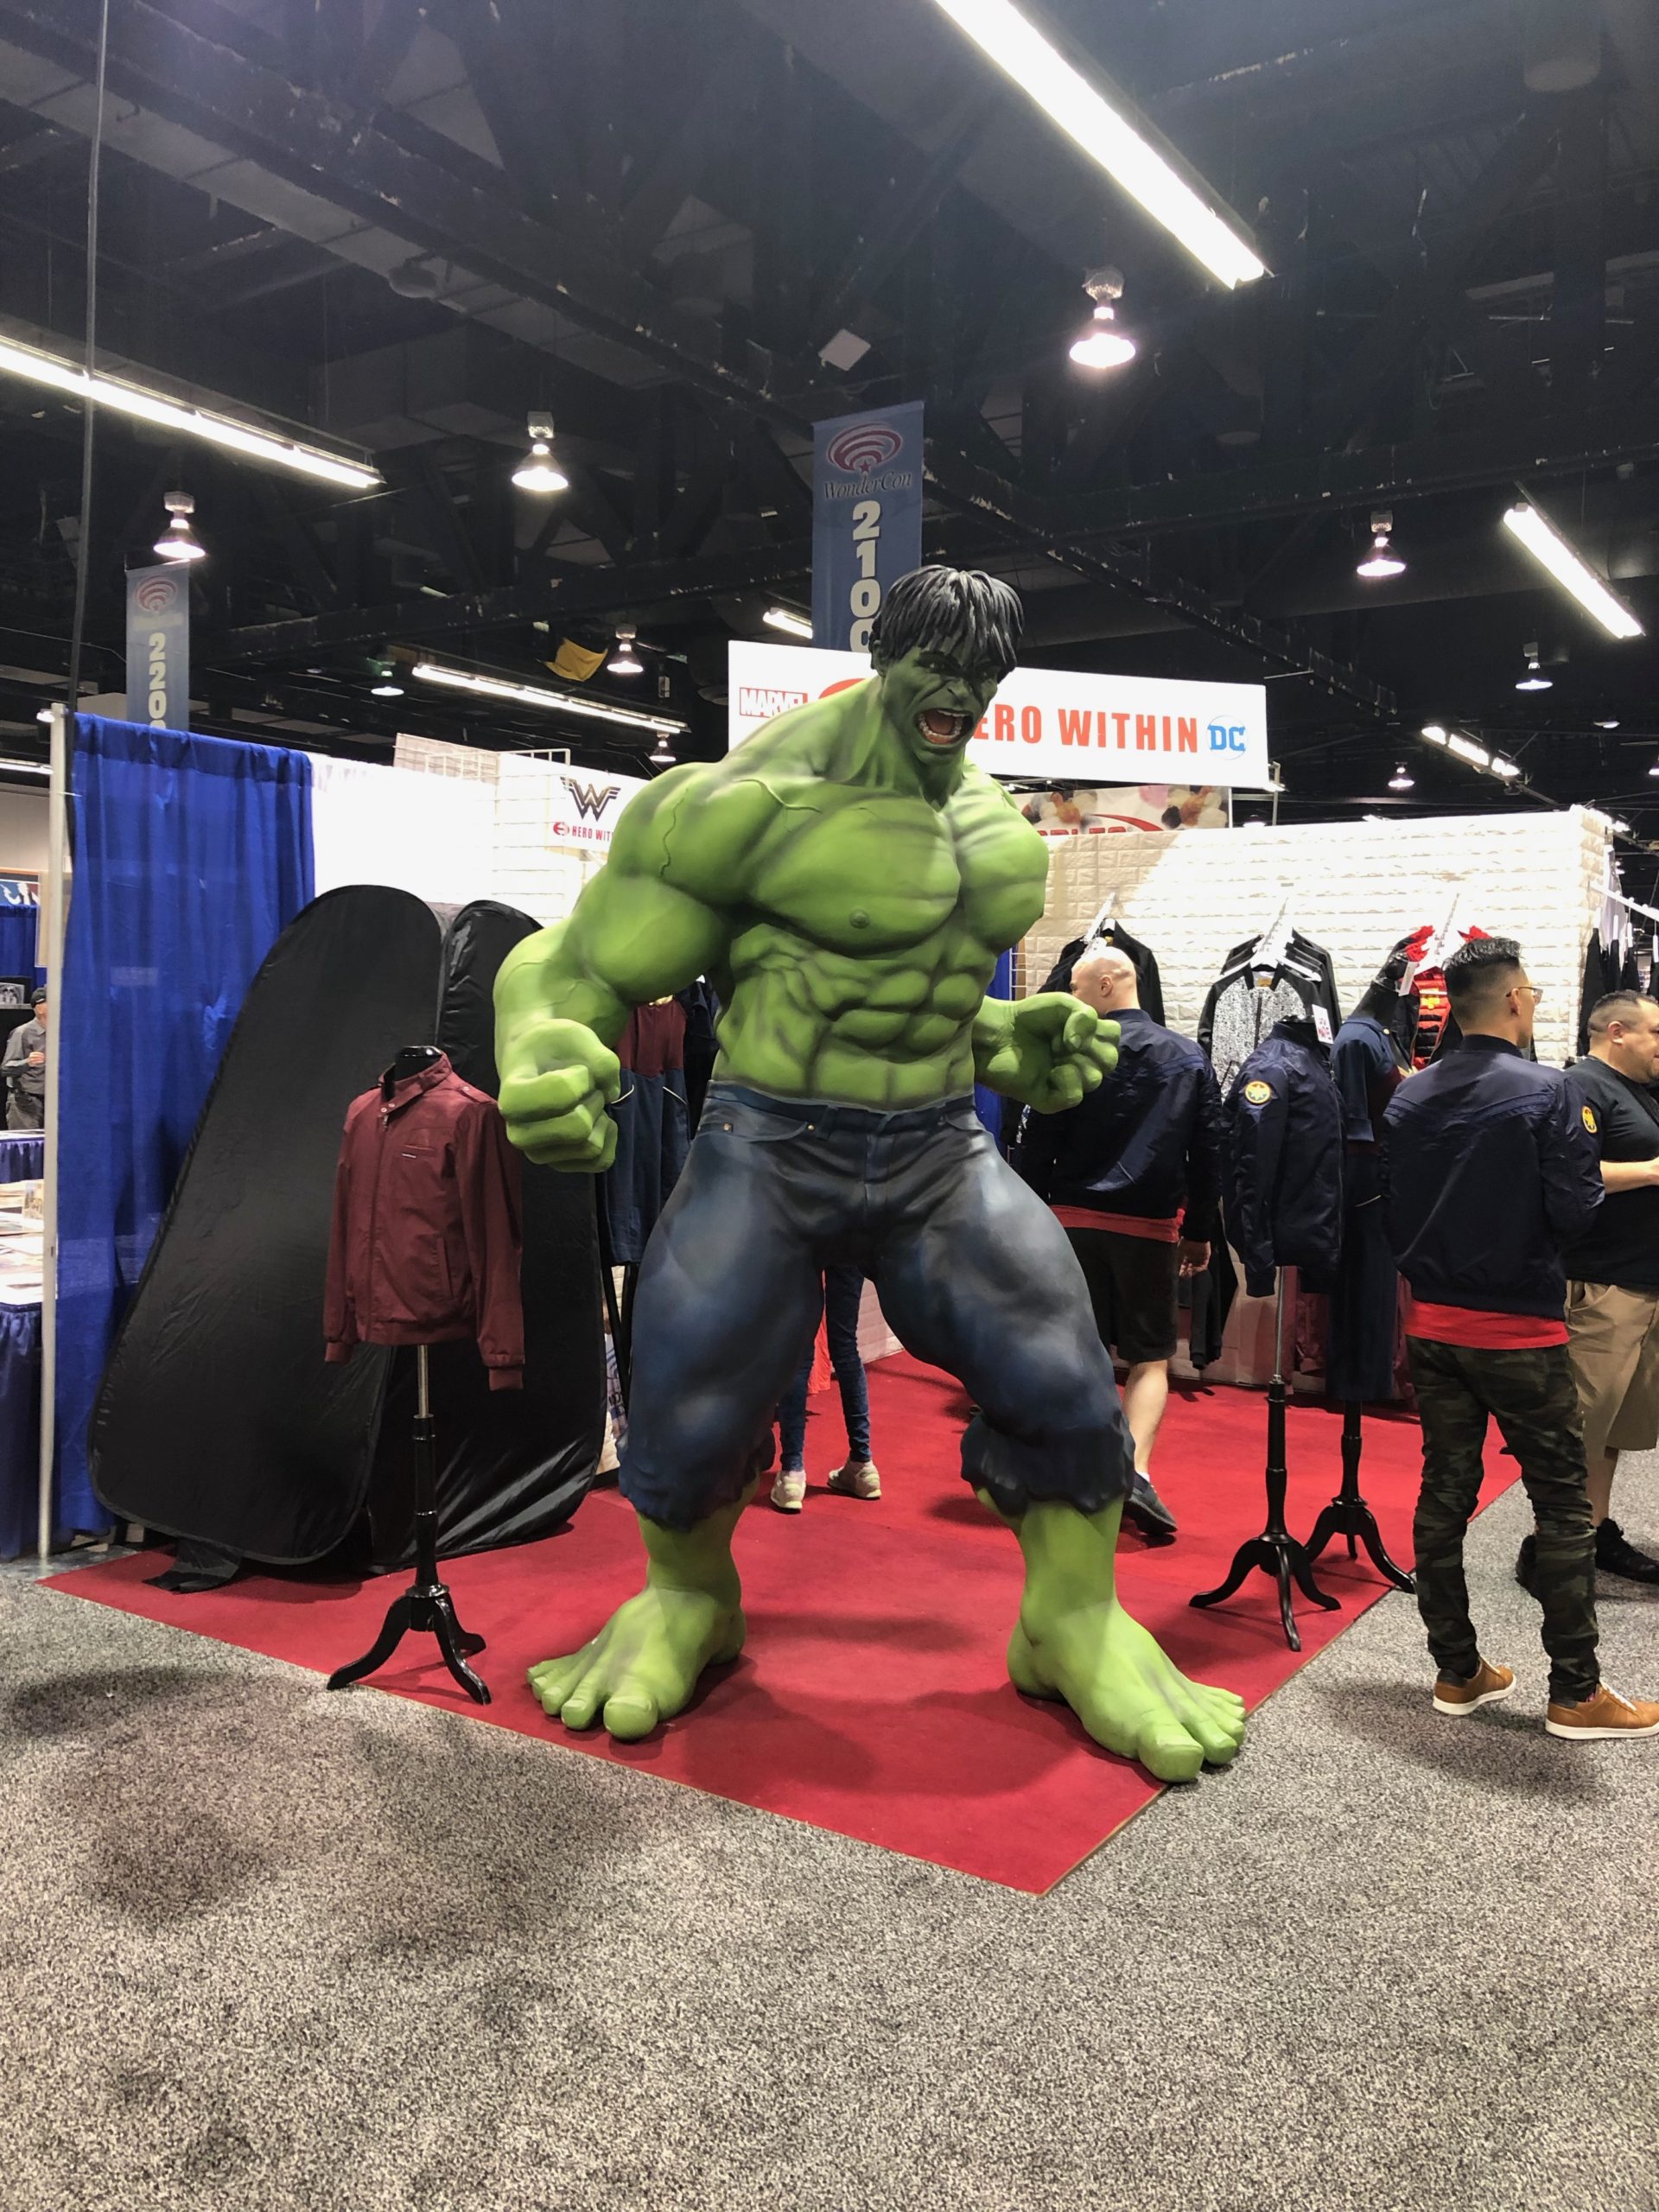 A Hulk statue at the Hero Within booth at WonderCon 2019. Photo: Danny Pham/dorkaholics.